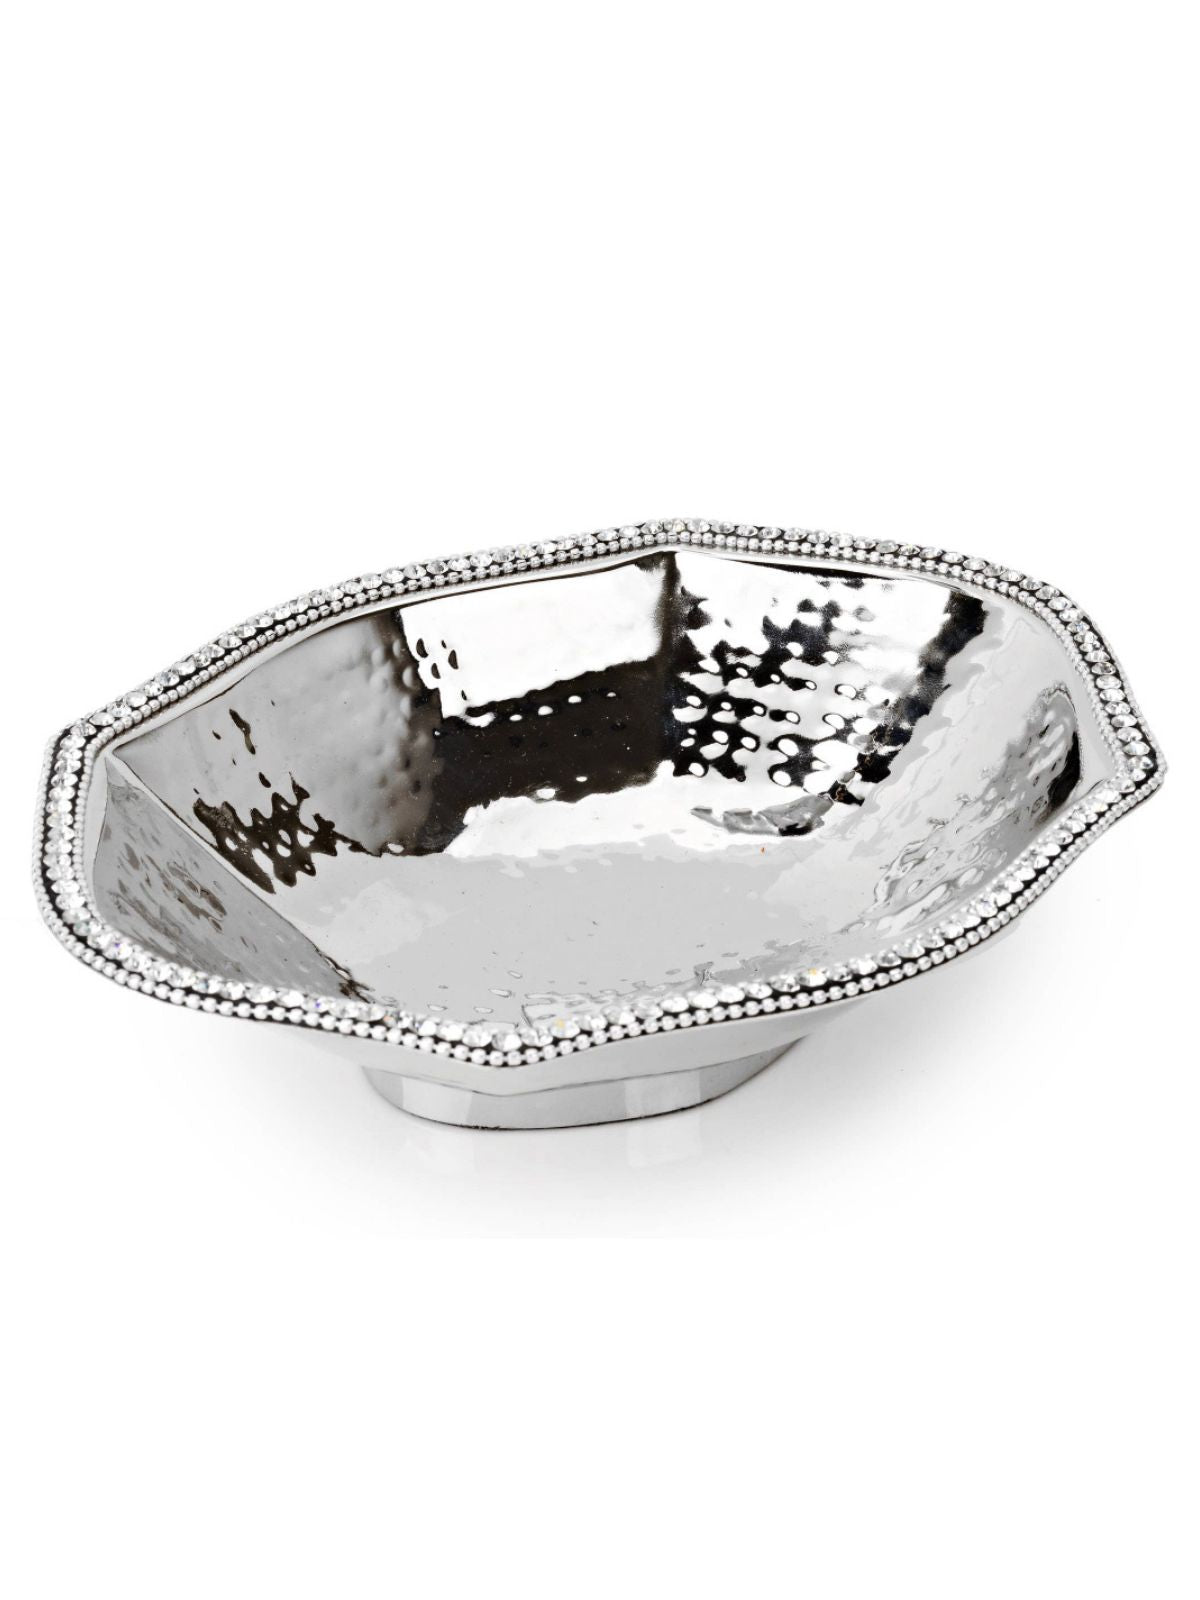 Stainless Steel Octagonal Bowl with Diamond Detail Accents, Measures 8.75L x 7W x 2H.